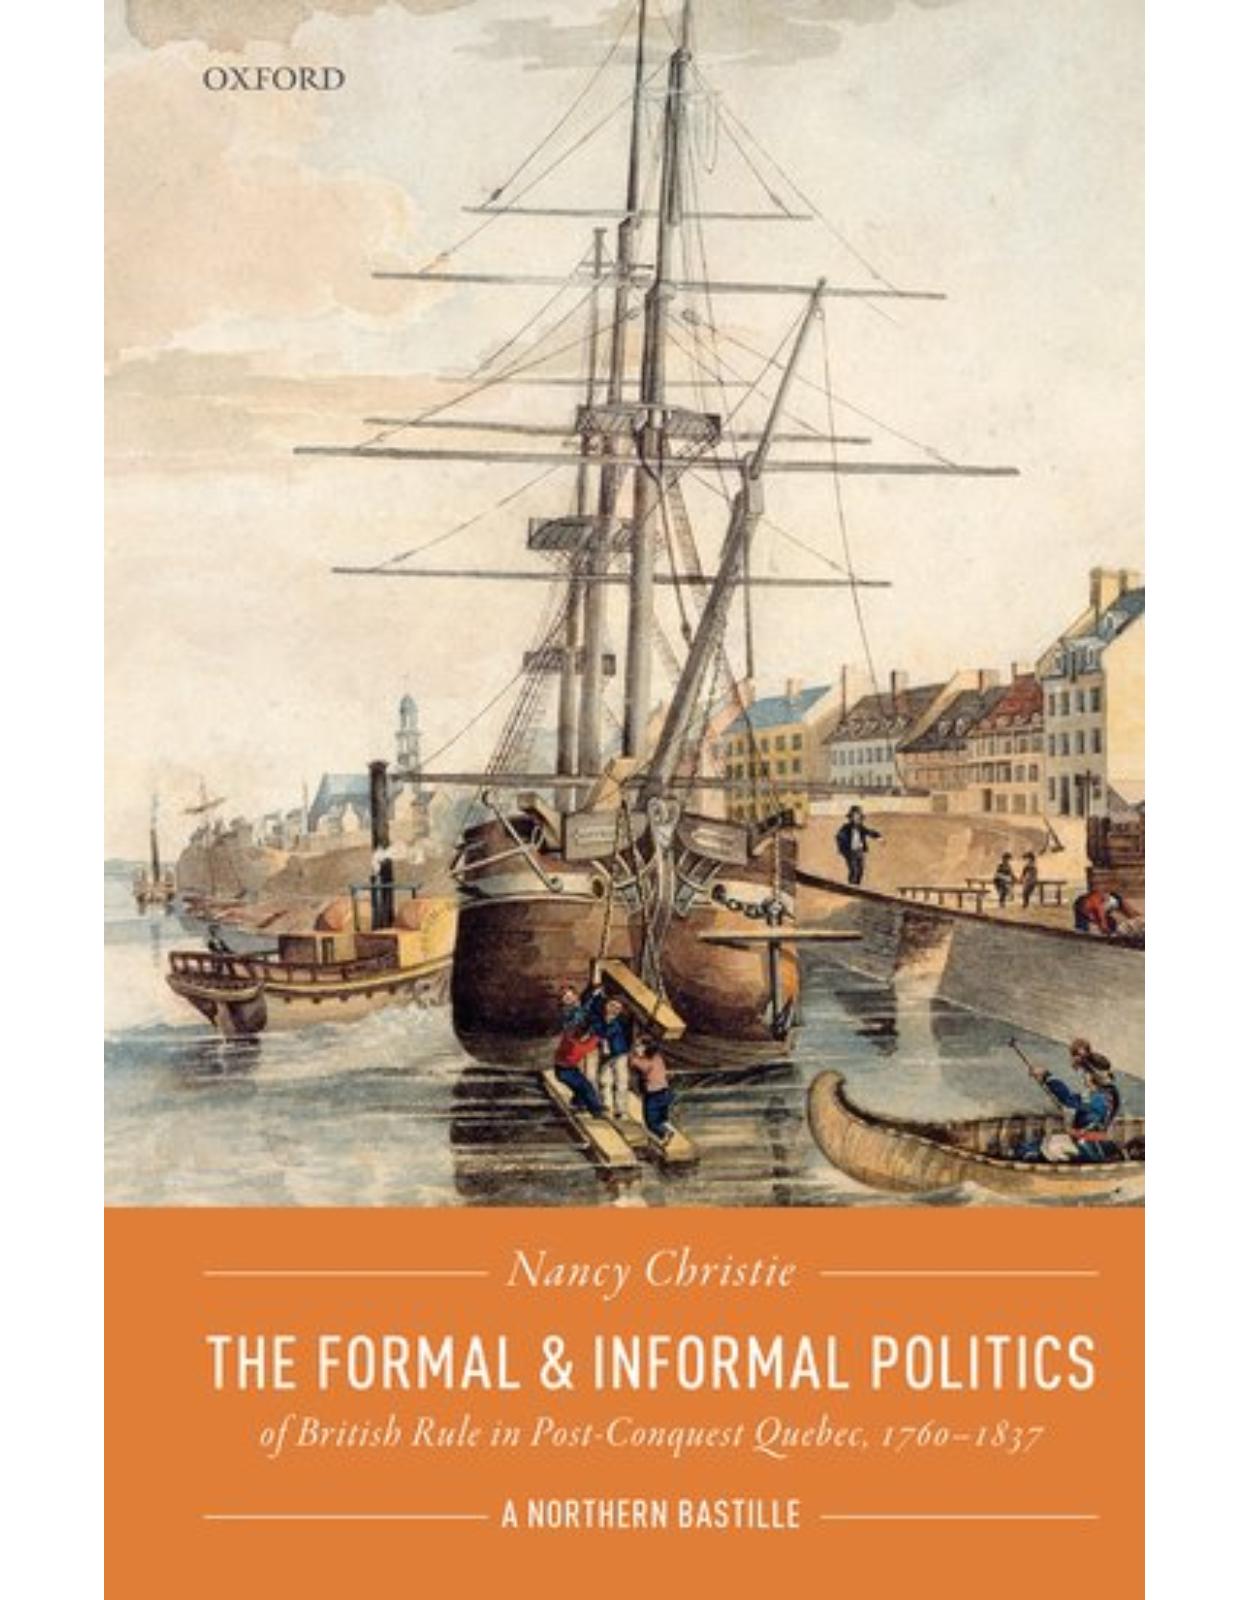 The Formal and Informal Politics of British Rule In Post-Conquest Quebec, 1760-1837